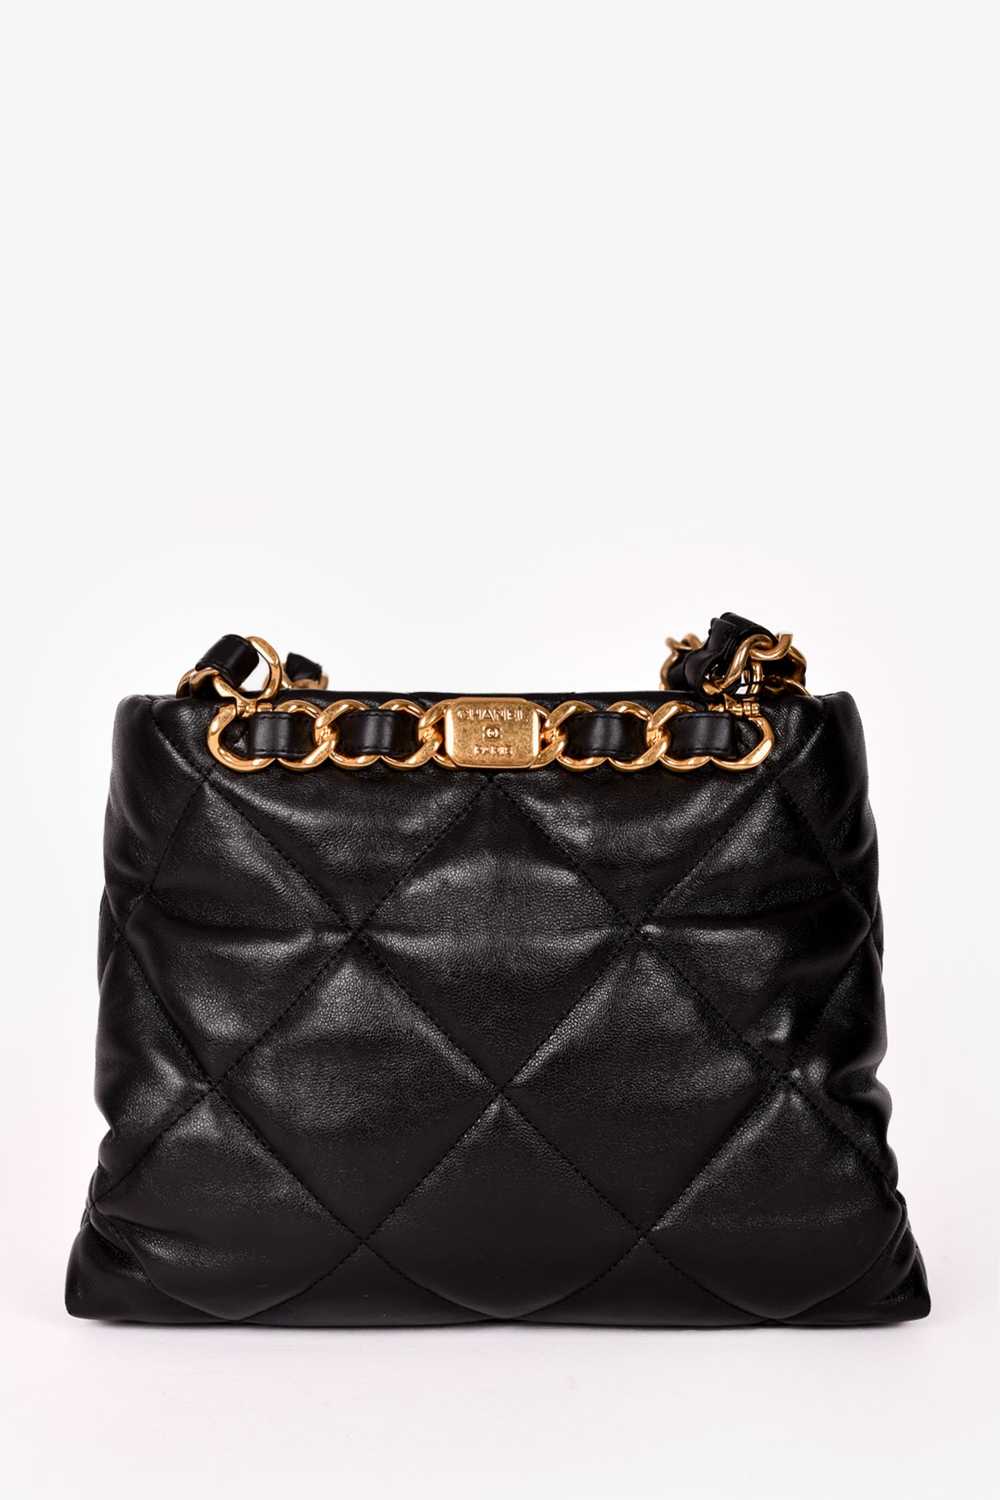 Pre-loved Chanel™ Black Lambskin Quilted Small Sh… - image 6